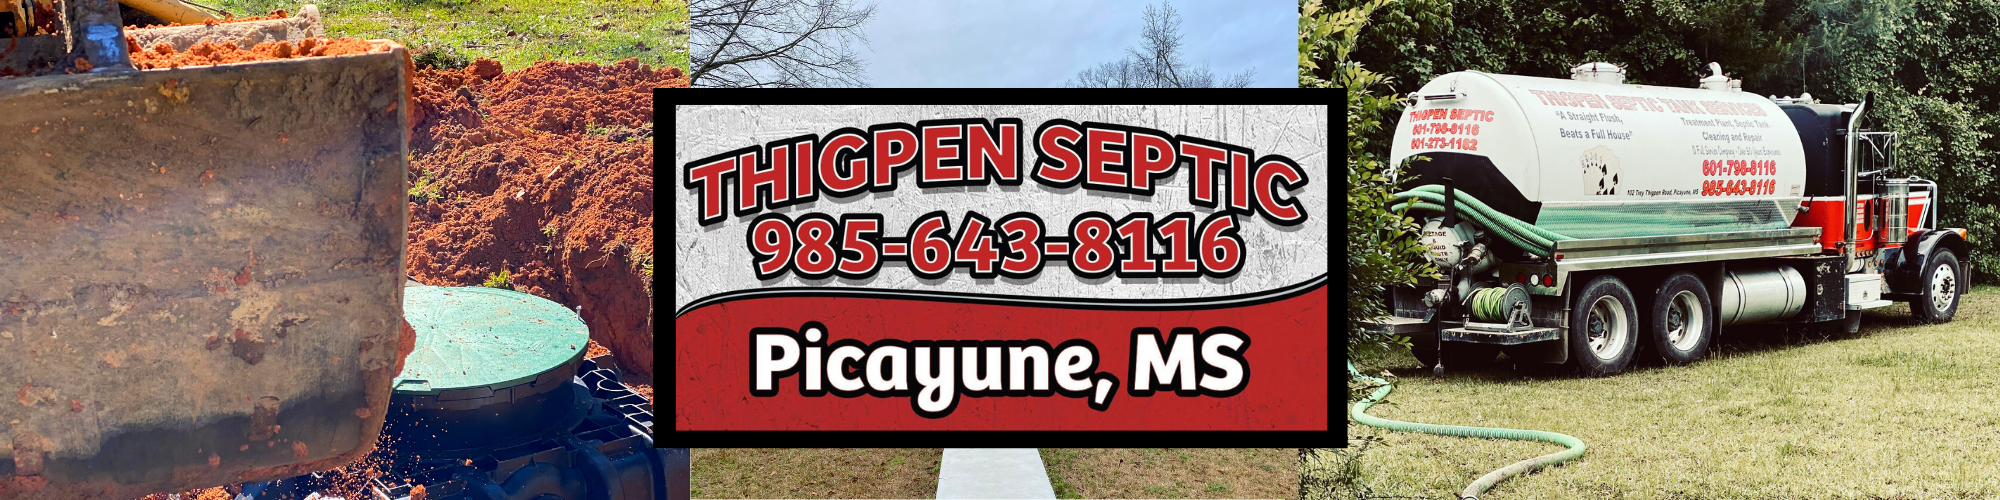 Call Thigpen Septic Today